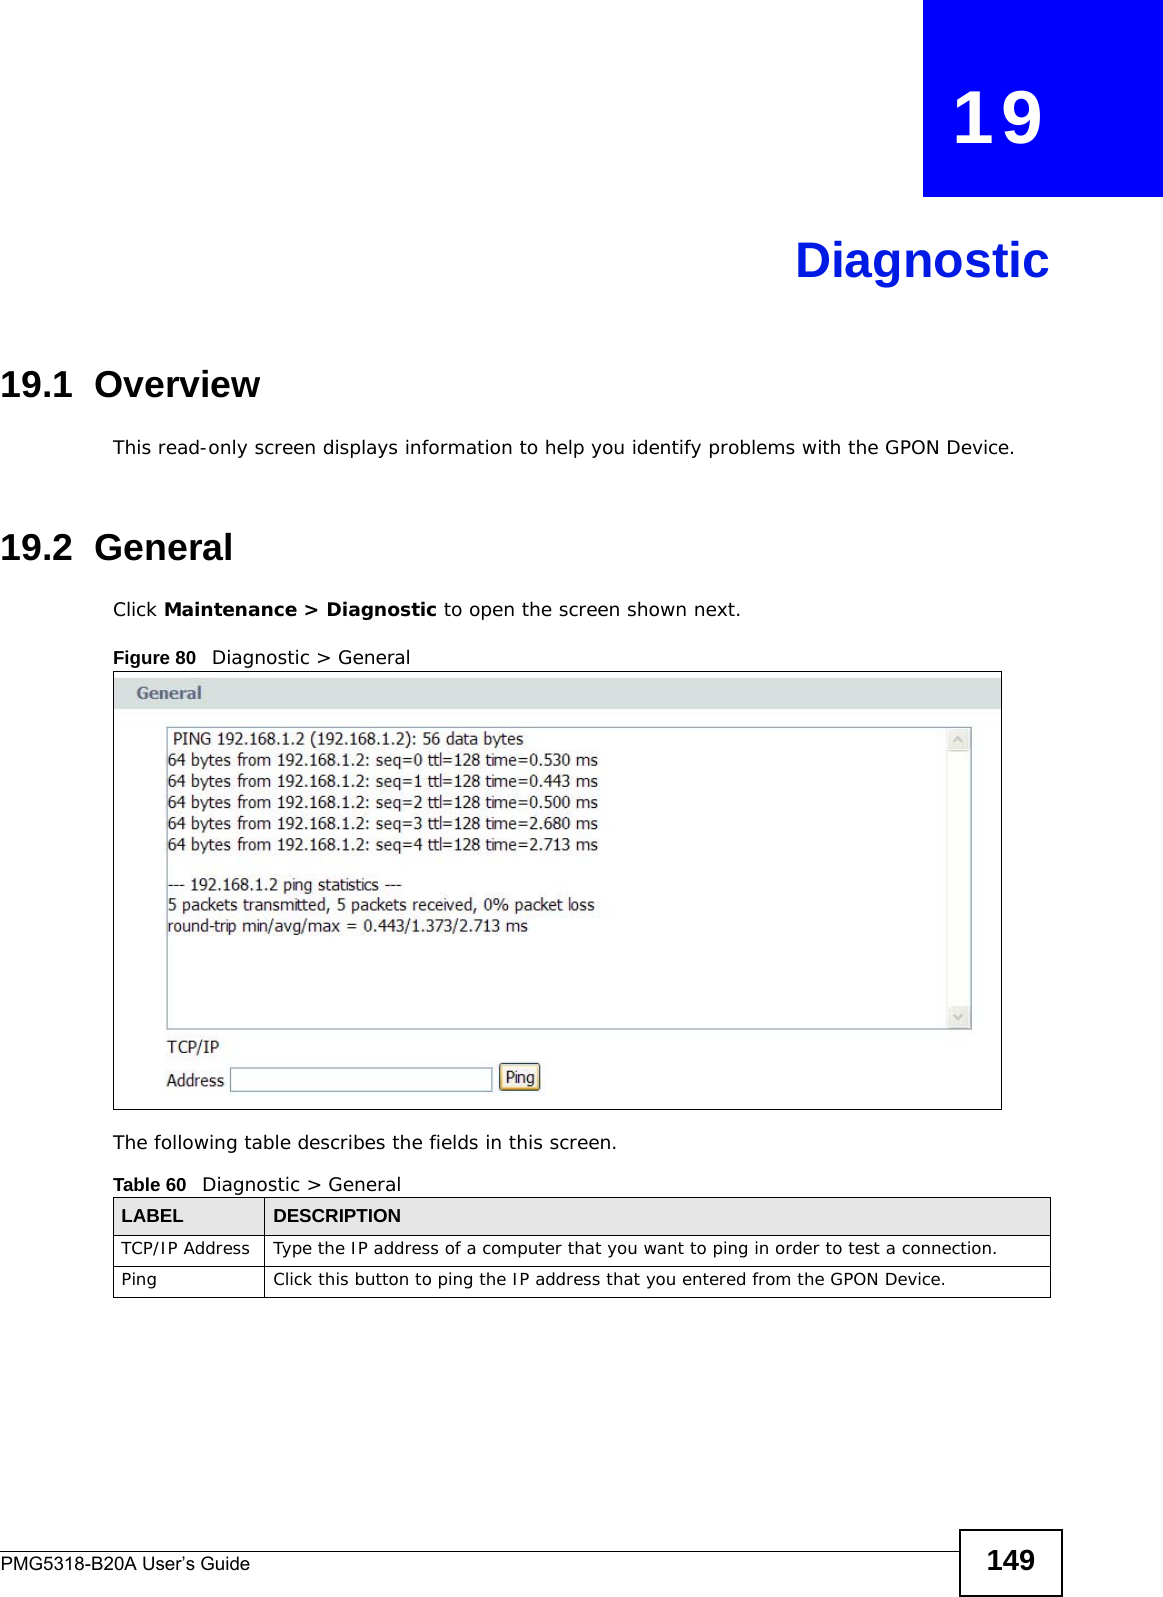 PMG5318-B20A User’s Guide 149CHAPTER   19Diagnostic19.1  OverviewThis read-only screen displays information to help you identify problems with the GPON Device.19.2  General  Click Maintenance &gt; Diagnostic to open the screen shown next. Figure 80   Diagnostic &gt; GeneralThe following table describes the fields in this screen. Table 60   Diagnostic &gt; GeneralLABEL DESCRIPTIONTCP/IP Address Type the IP address of a computer that you want to ping in order to test a connection.Ping Click this button to ping the IP address that you entered from the GPON Device.